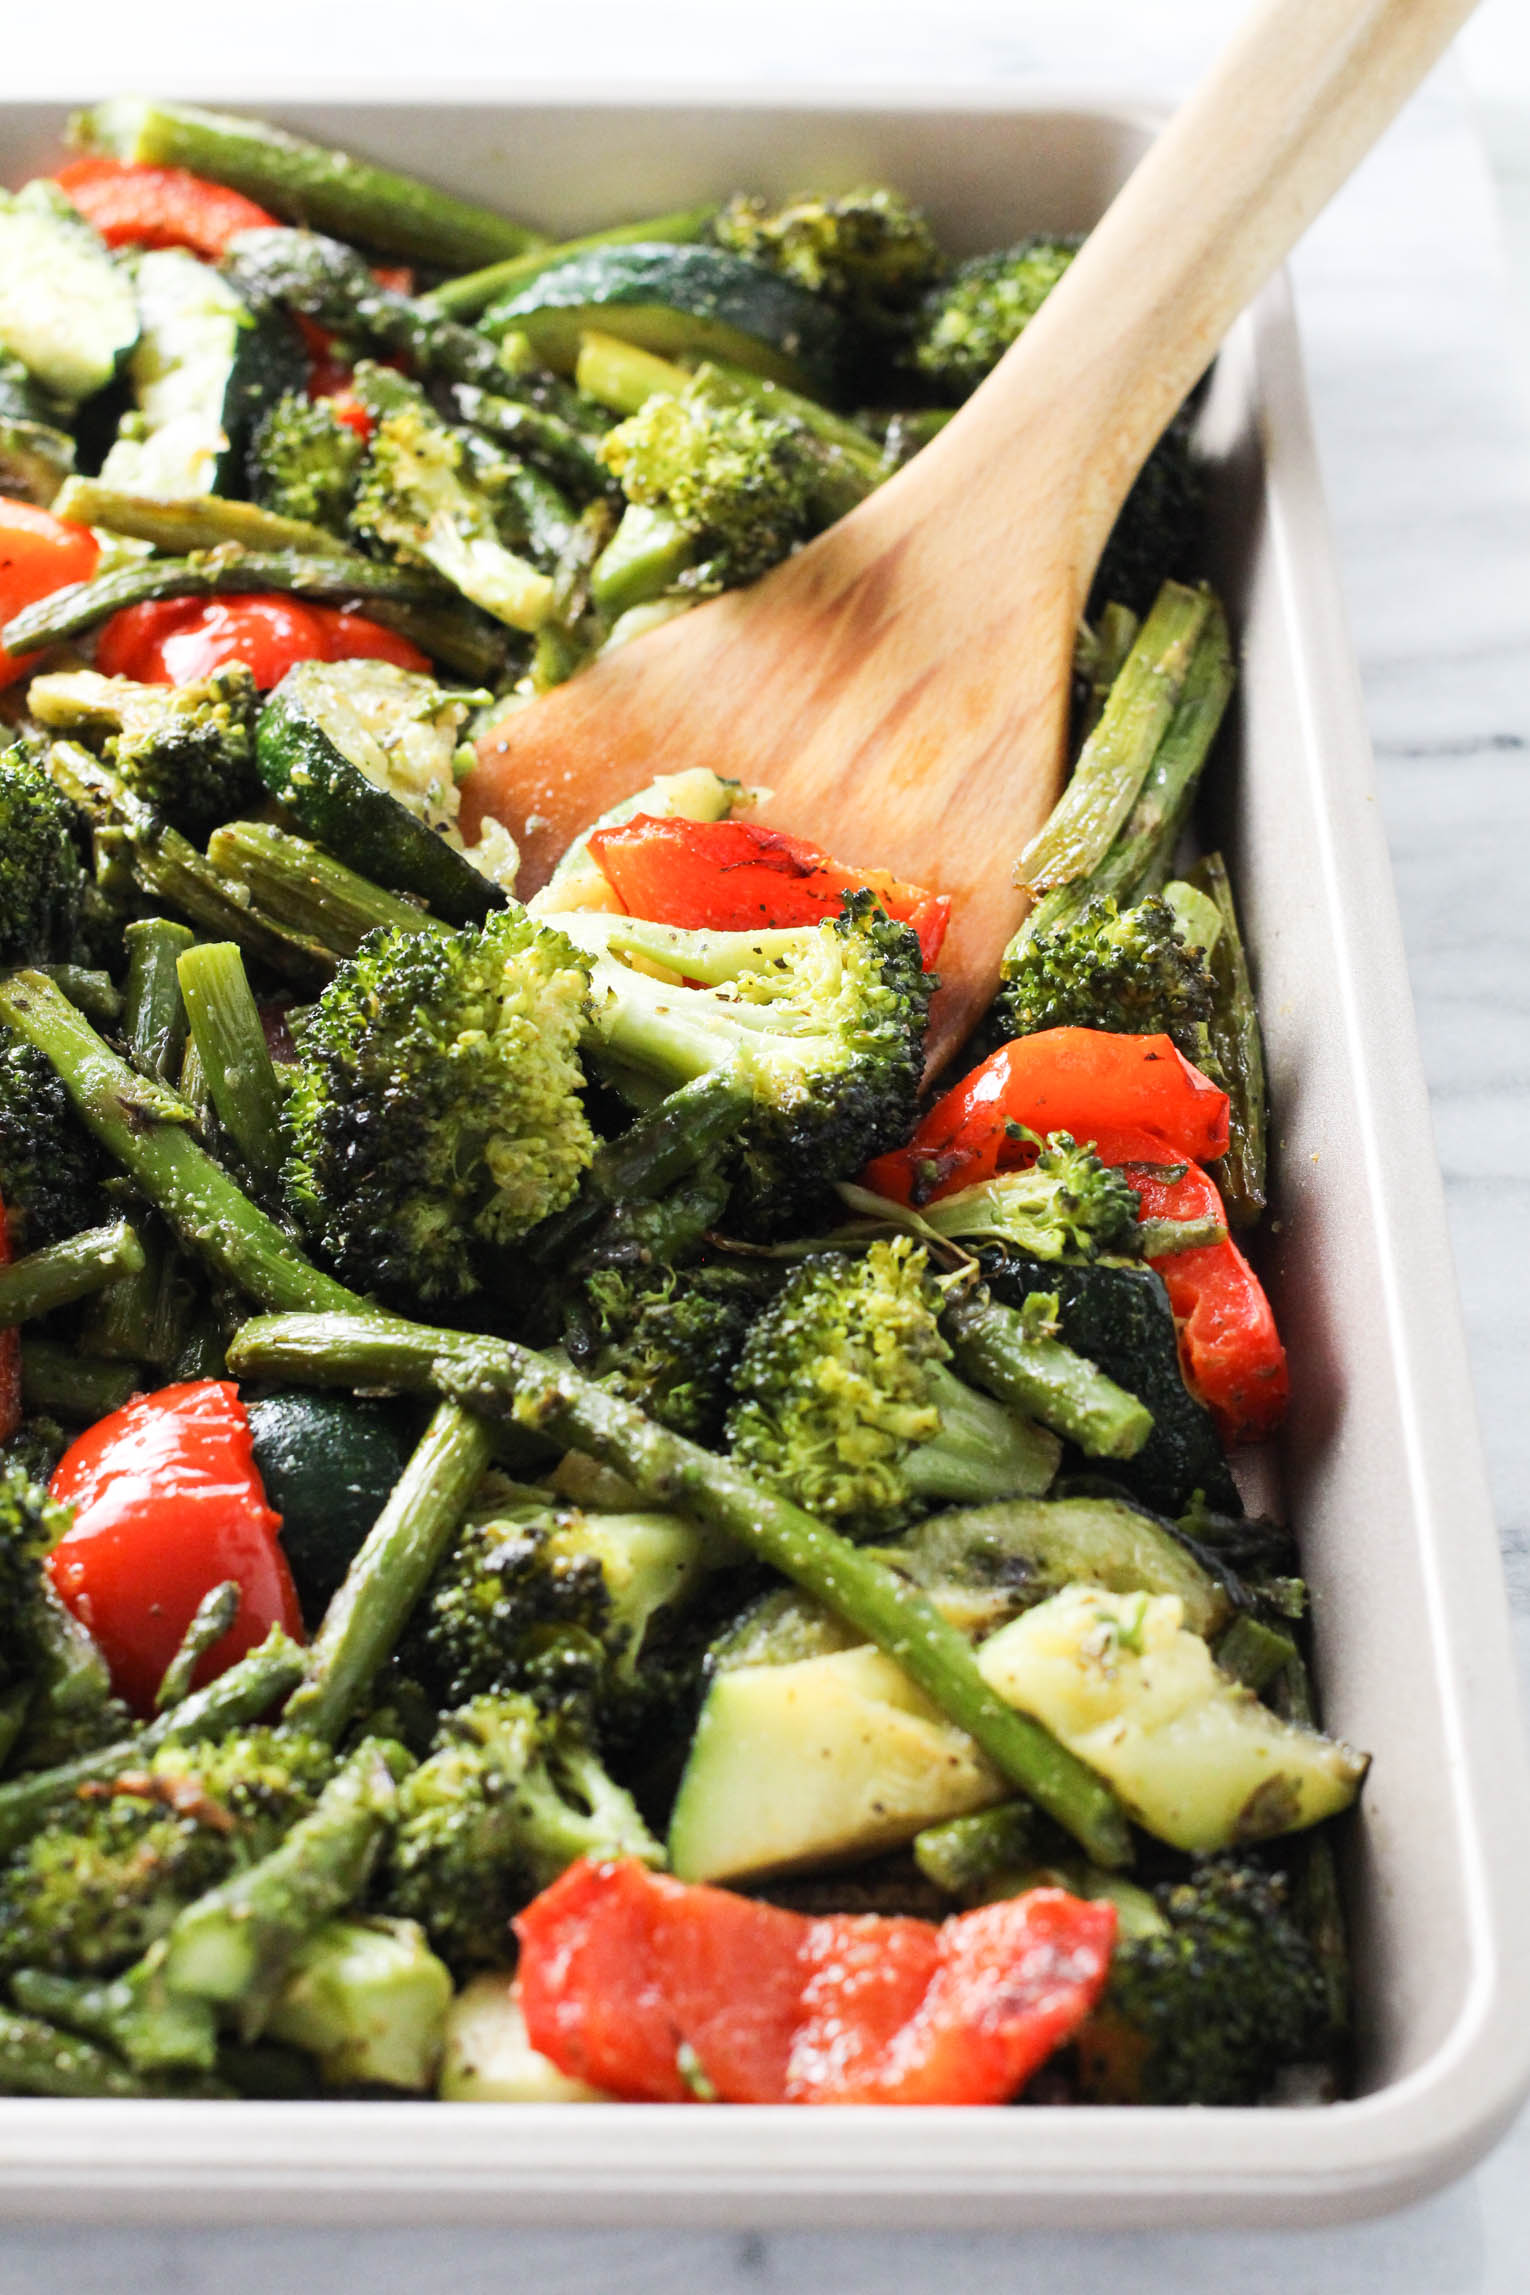 Roasted mixed vegetables on a baking sheet, being scooped with a wooden spoon.